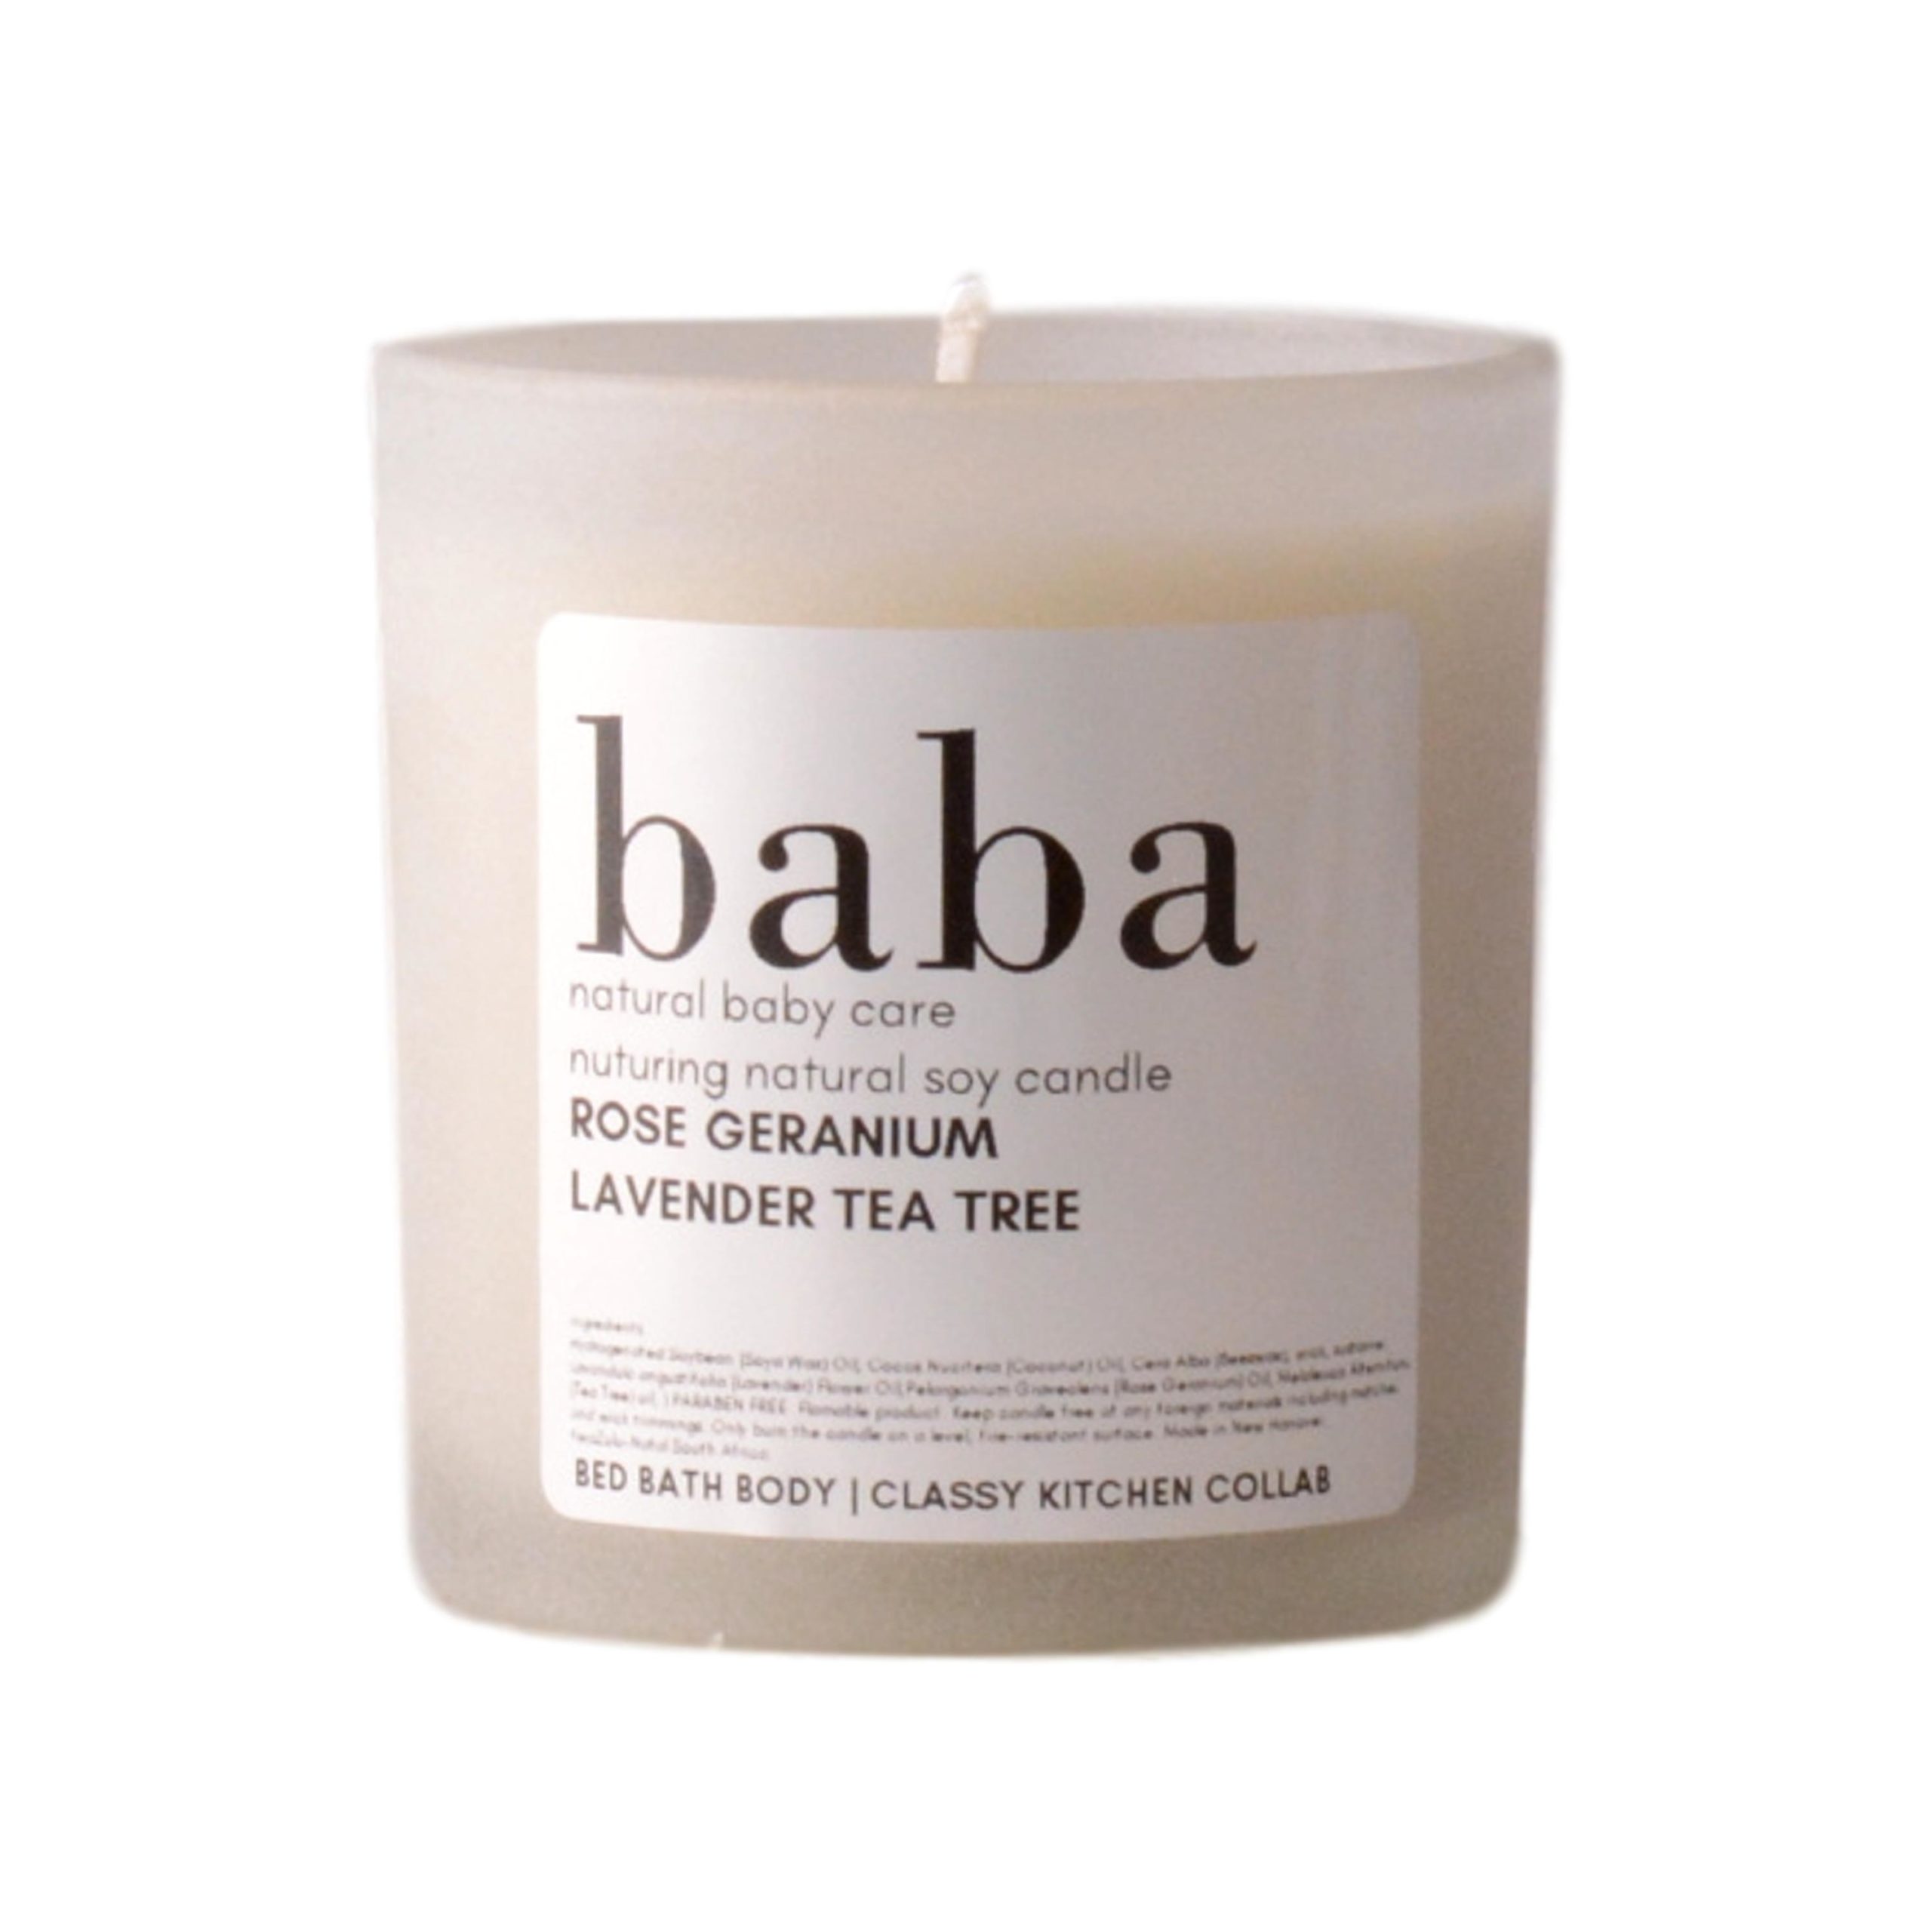 baba-nuturing-natural-soy-candle-in-white-gift-box